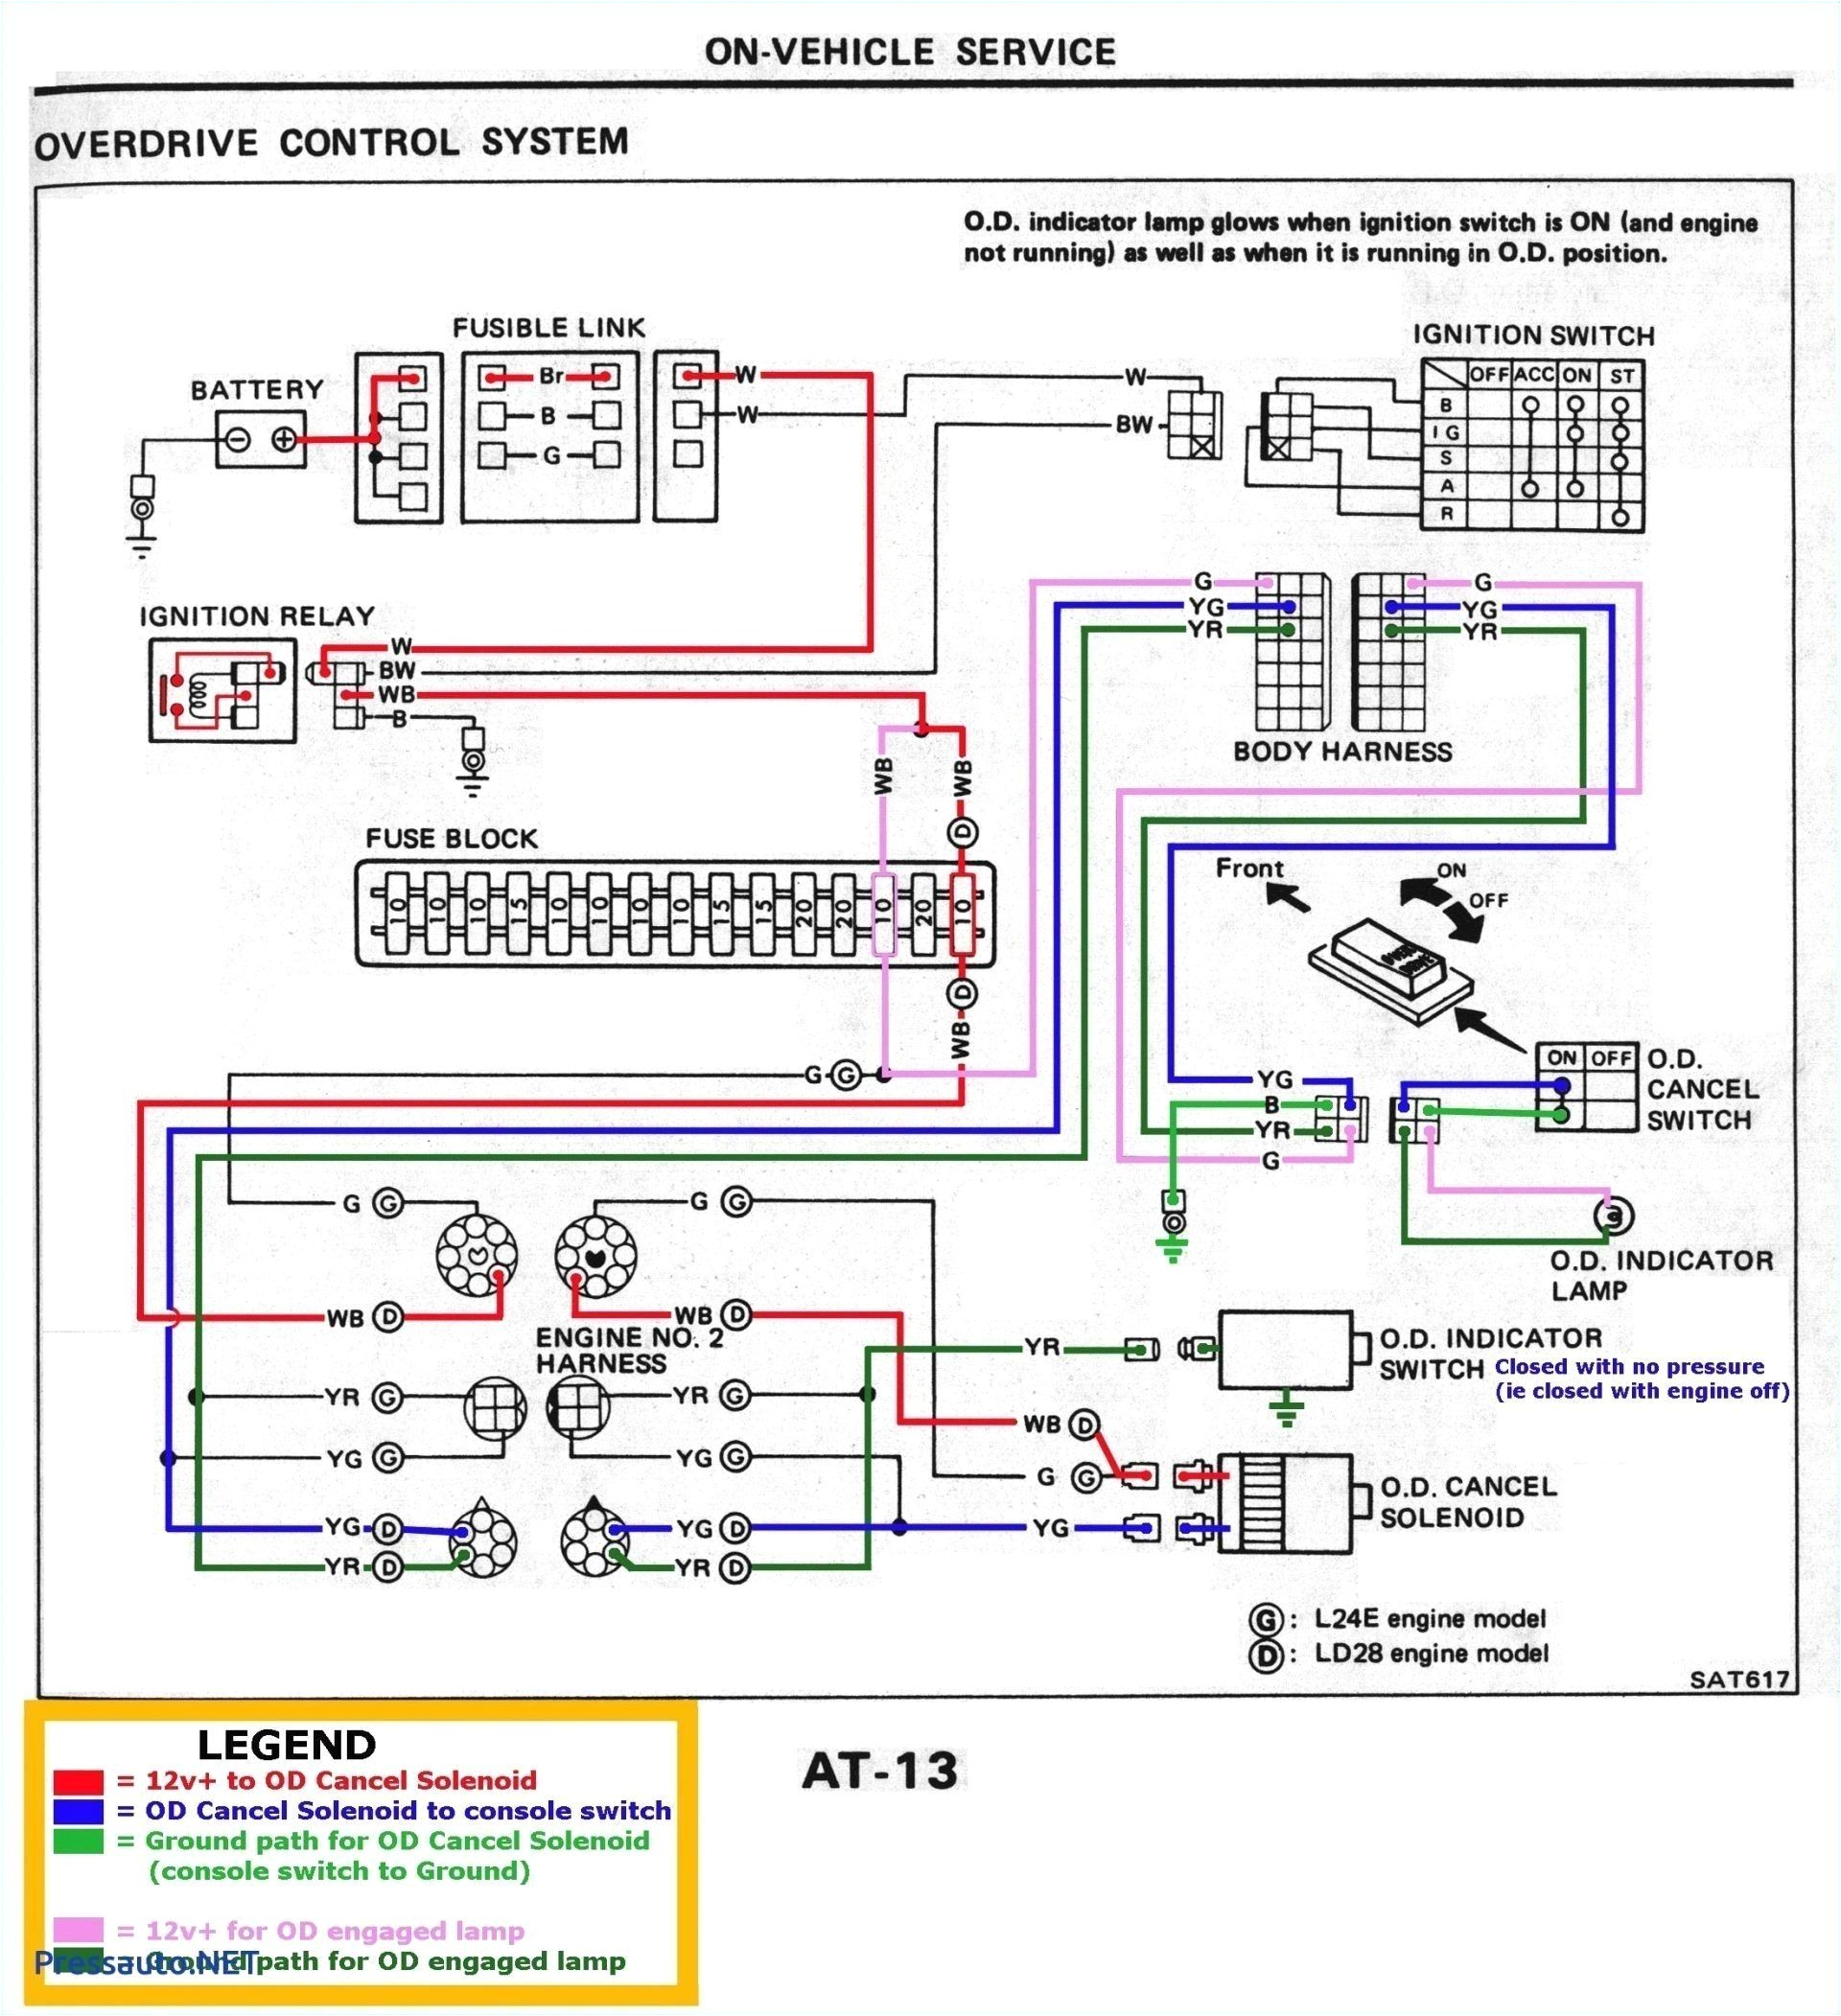 2004 ford F150 Wiring Diagram Pdf Technical Drawing Book Pdf In 2020 Electrical Wiring